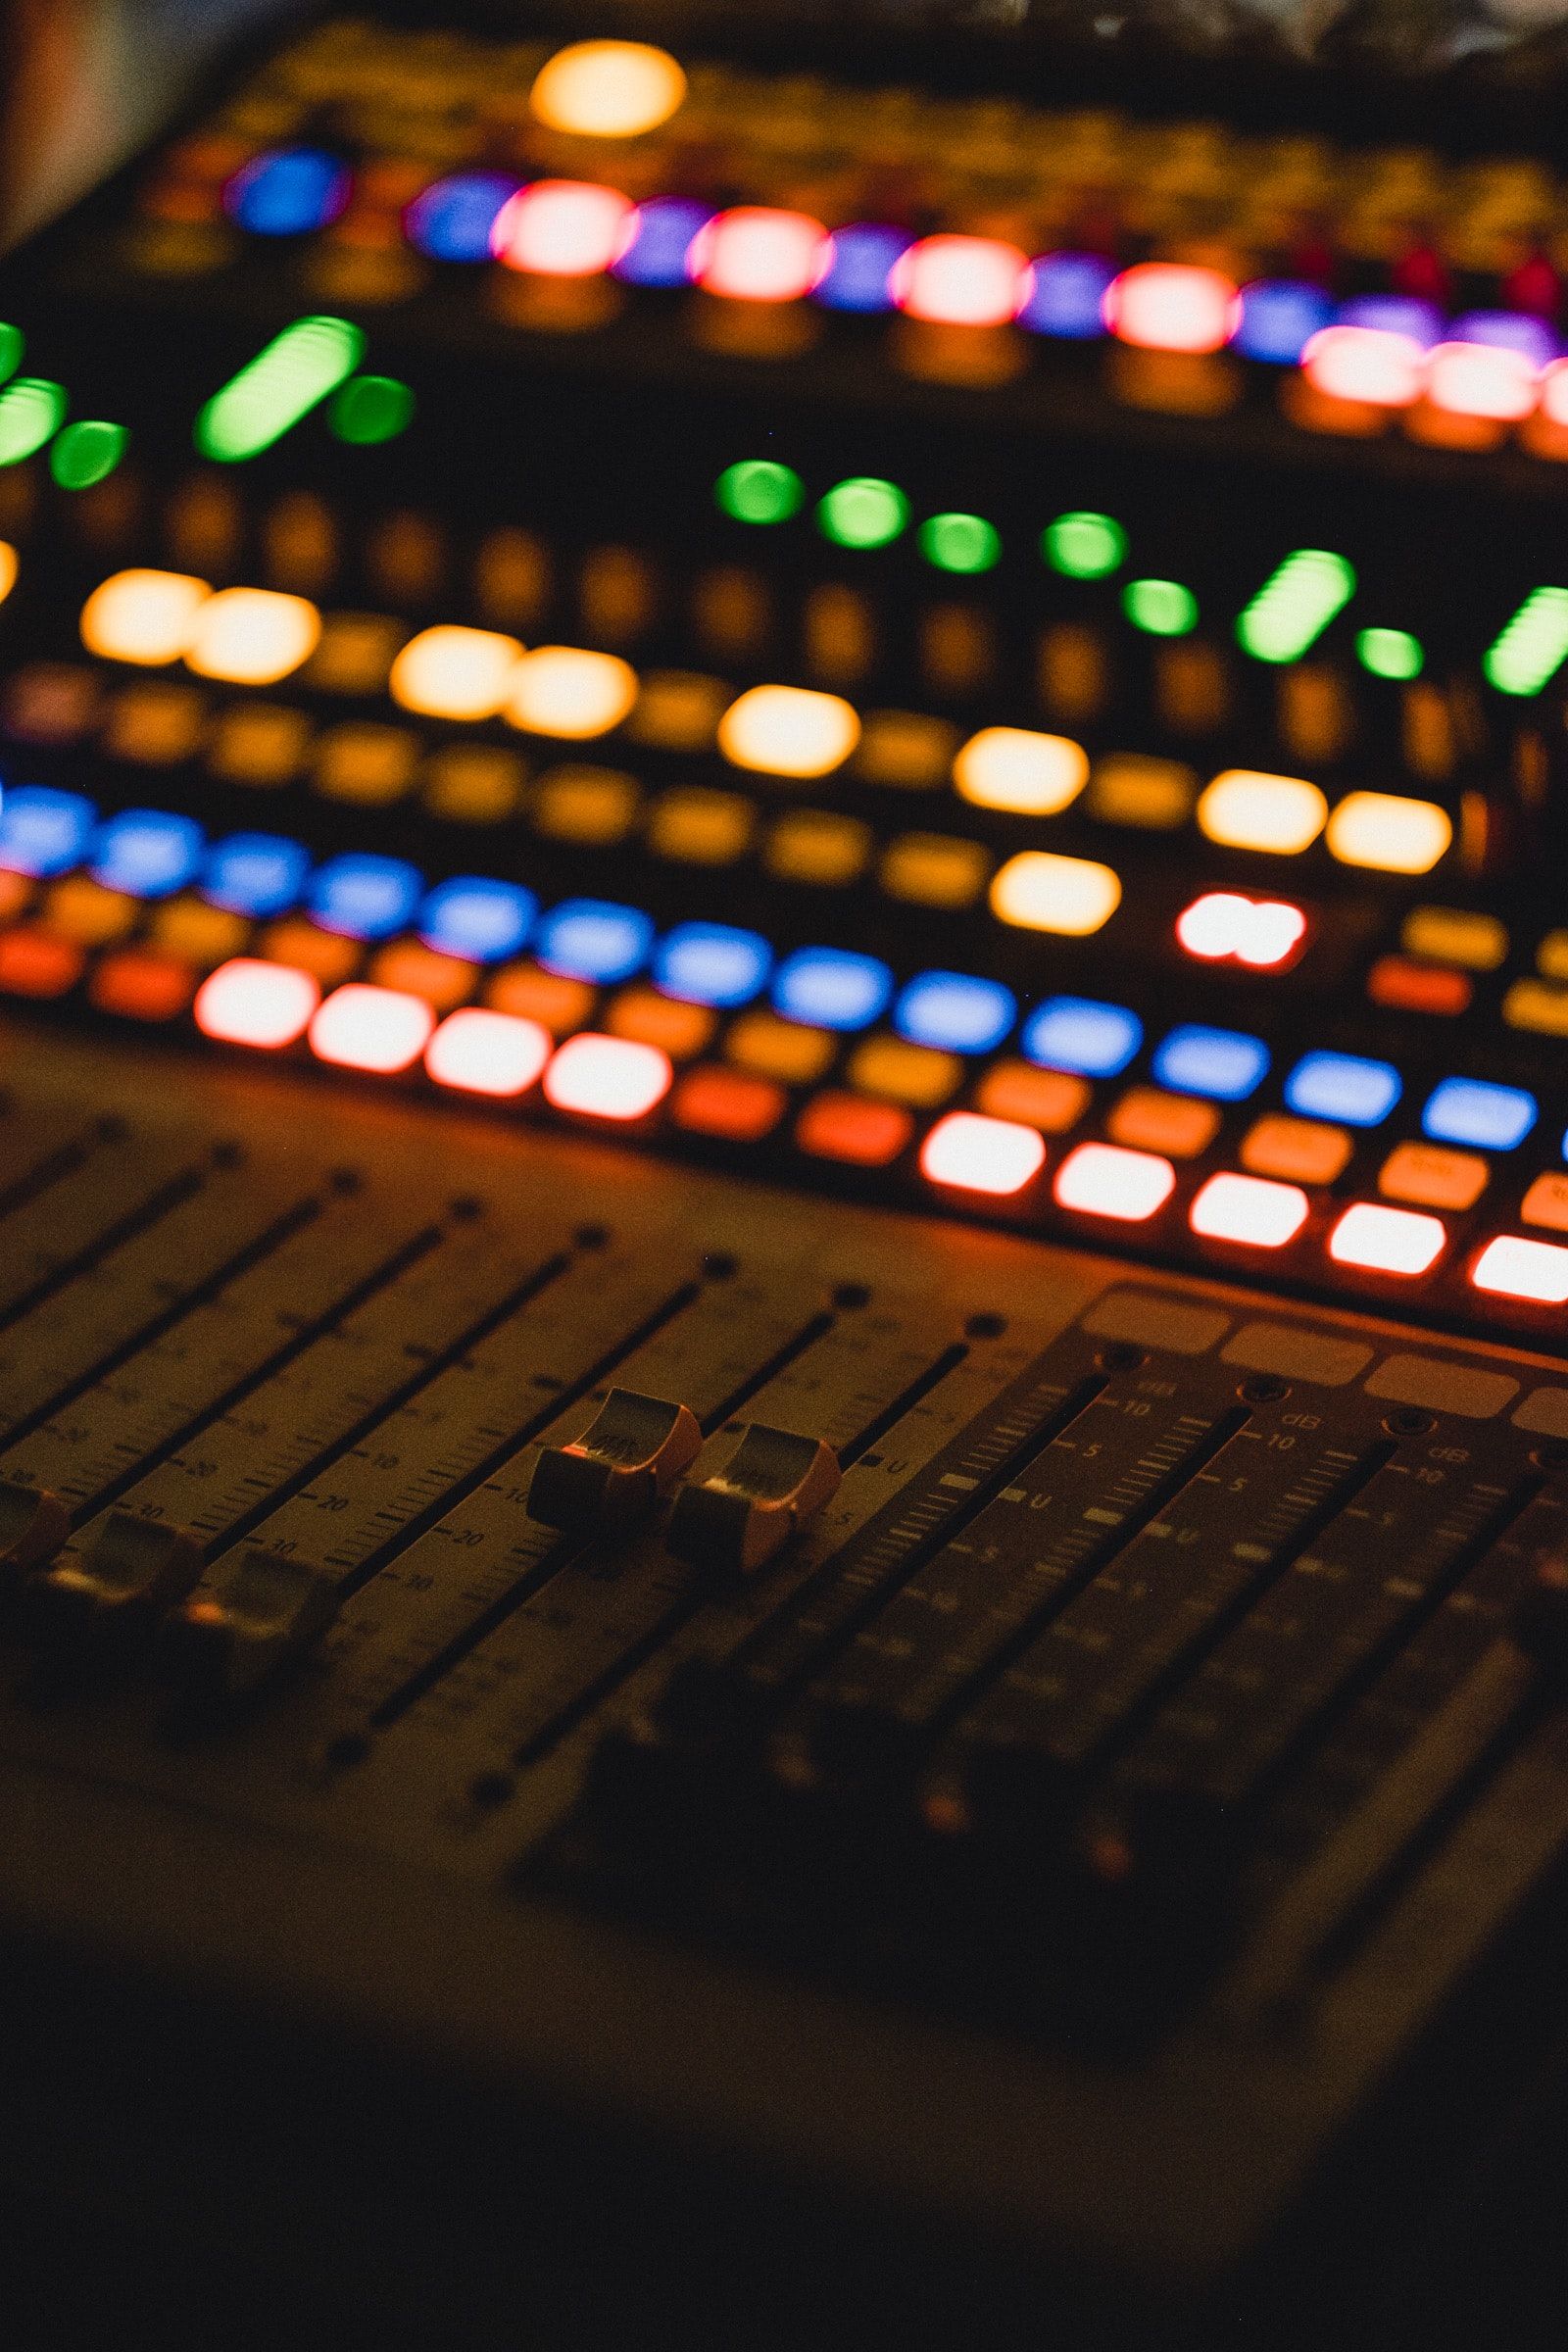 Need mixing or mastering? Look no further!